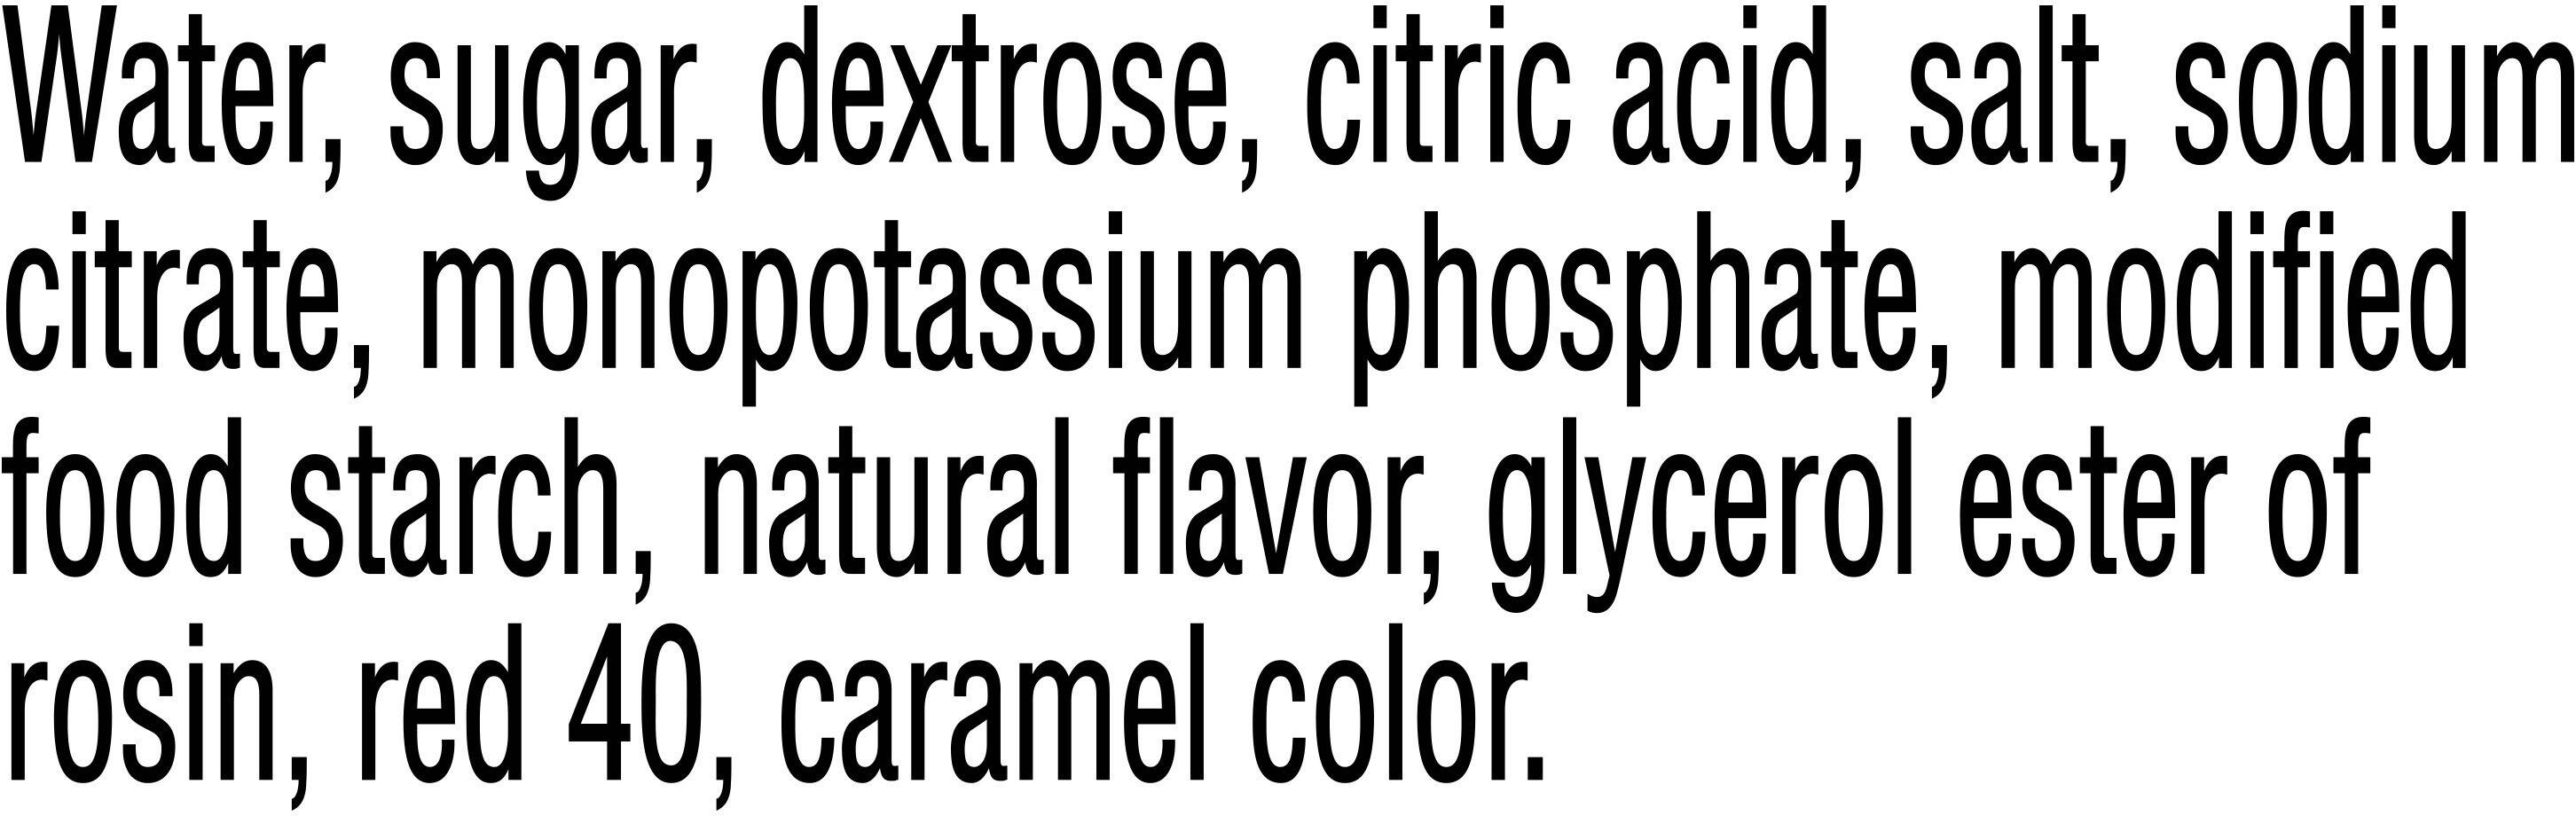 Image describing nutrition information for product Gatorade Fruit Punch